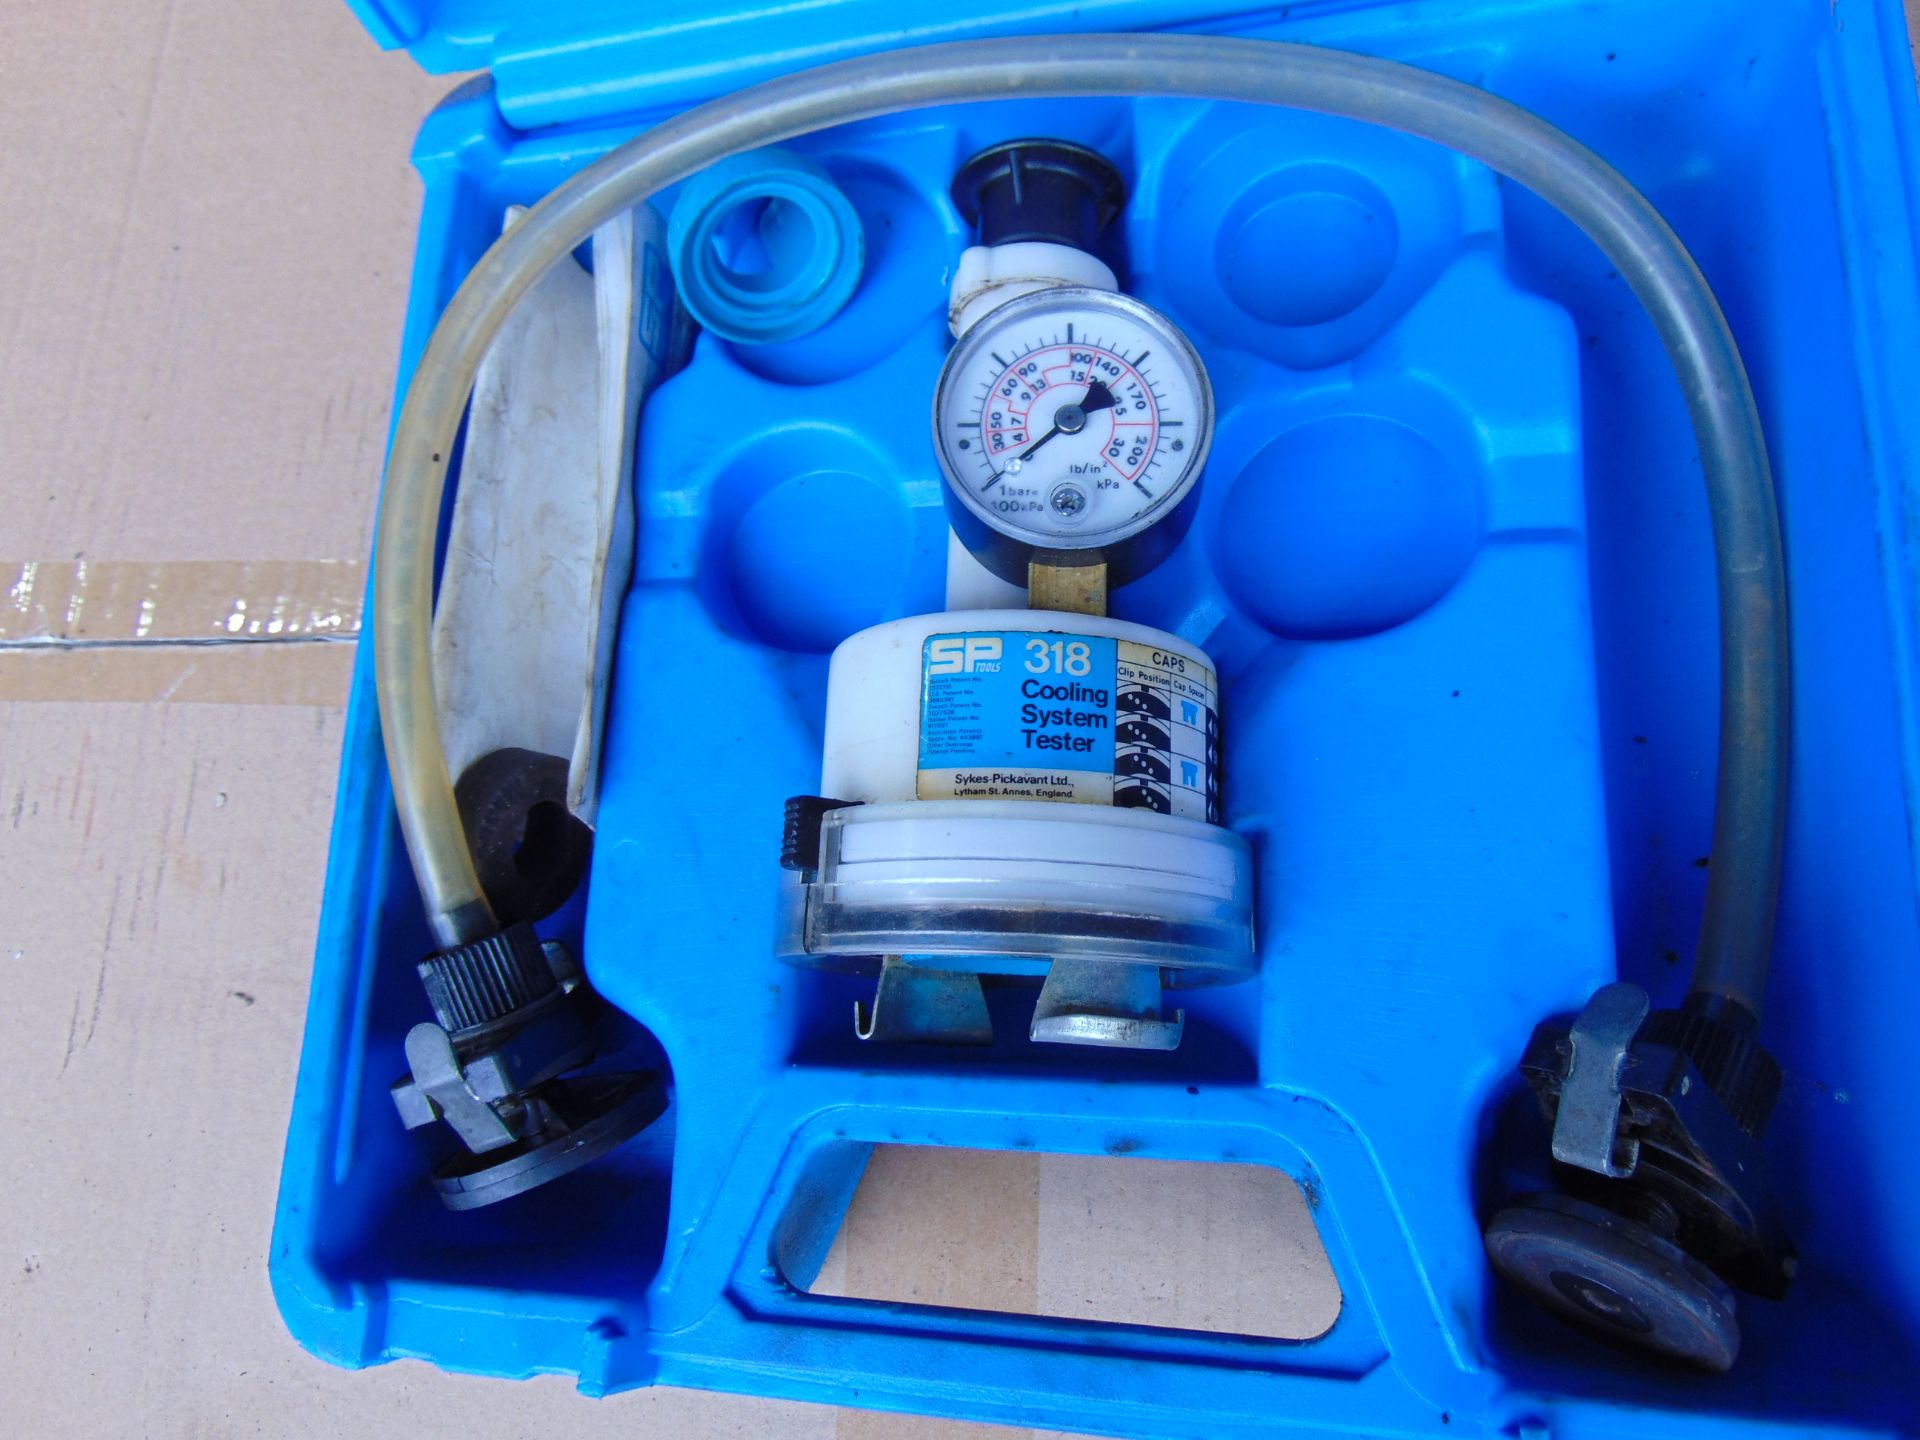 S.P Cooling System Testing Kit from UK Fire Service Workshop in Transit Case - Image 3 of 5